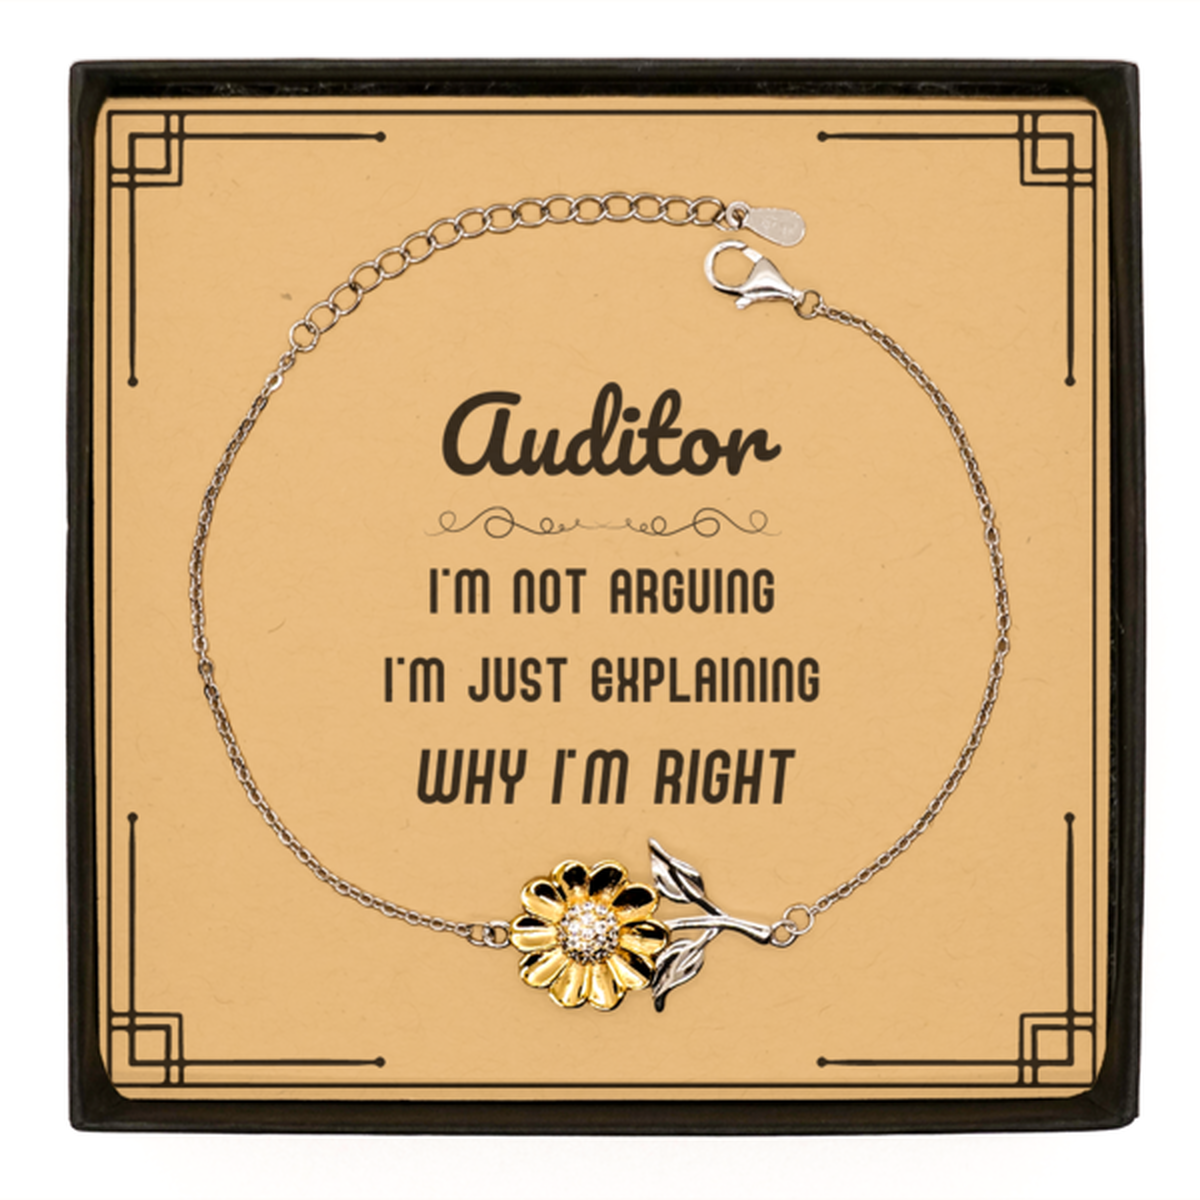 Auditor I'm not Arguing. I'm Just Explaining Why I'm RIGHT Sunflower Bracelet, Funny Saying Quote Auditor Gifts For Auditor Message Card Graduation Birthday Christmas Gifts for Men Women Coworker